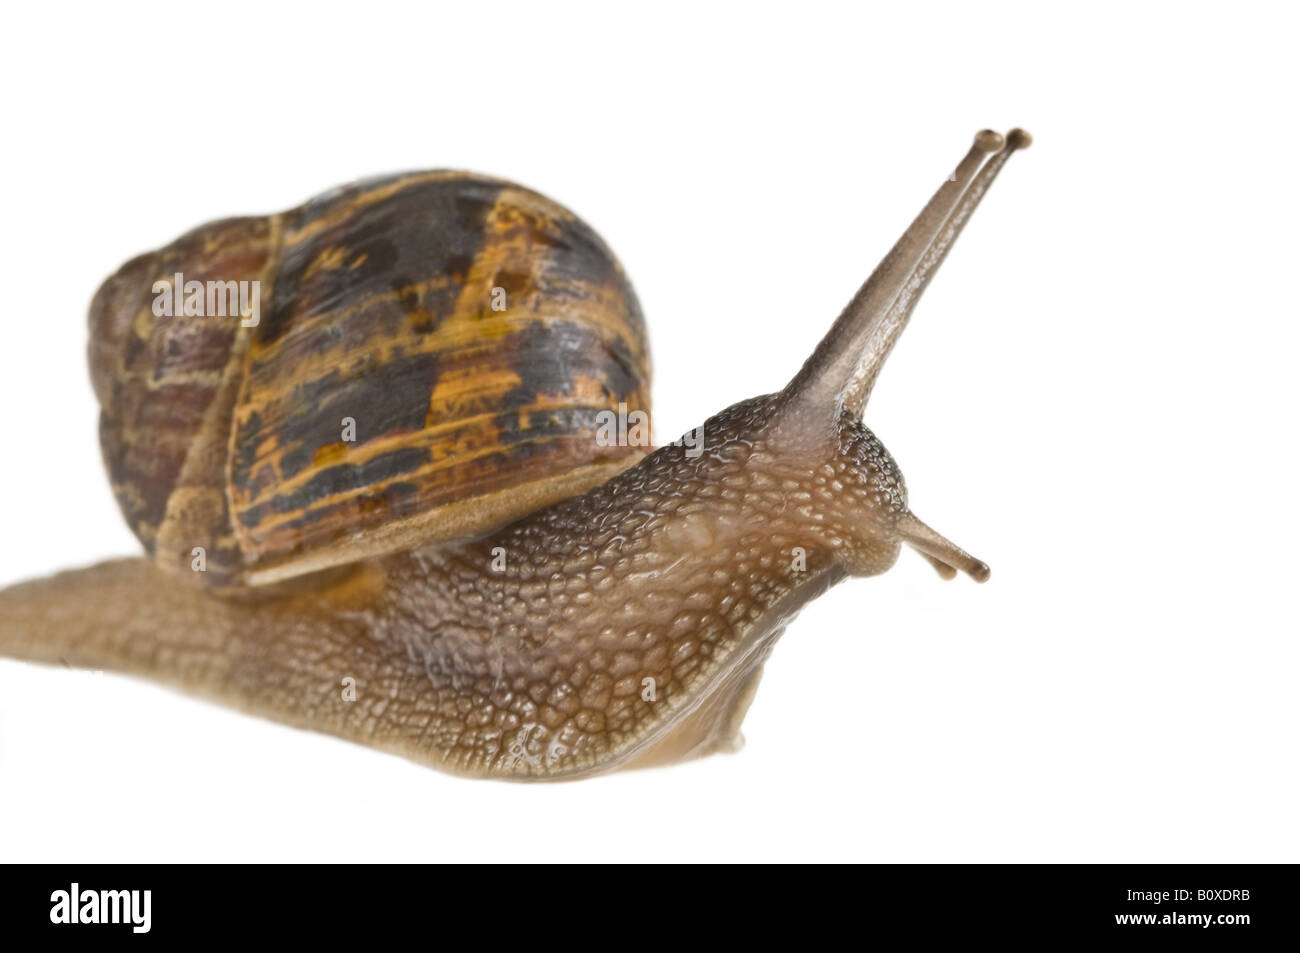 A common garden snail (Helix aspersa) against a pure white background. Stock Photo